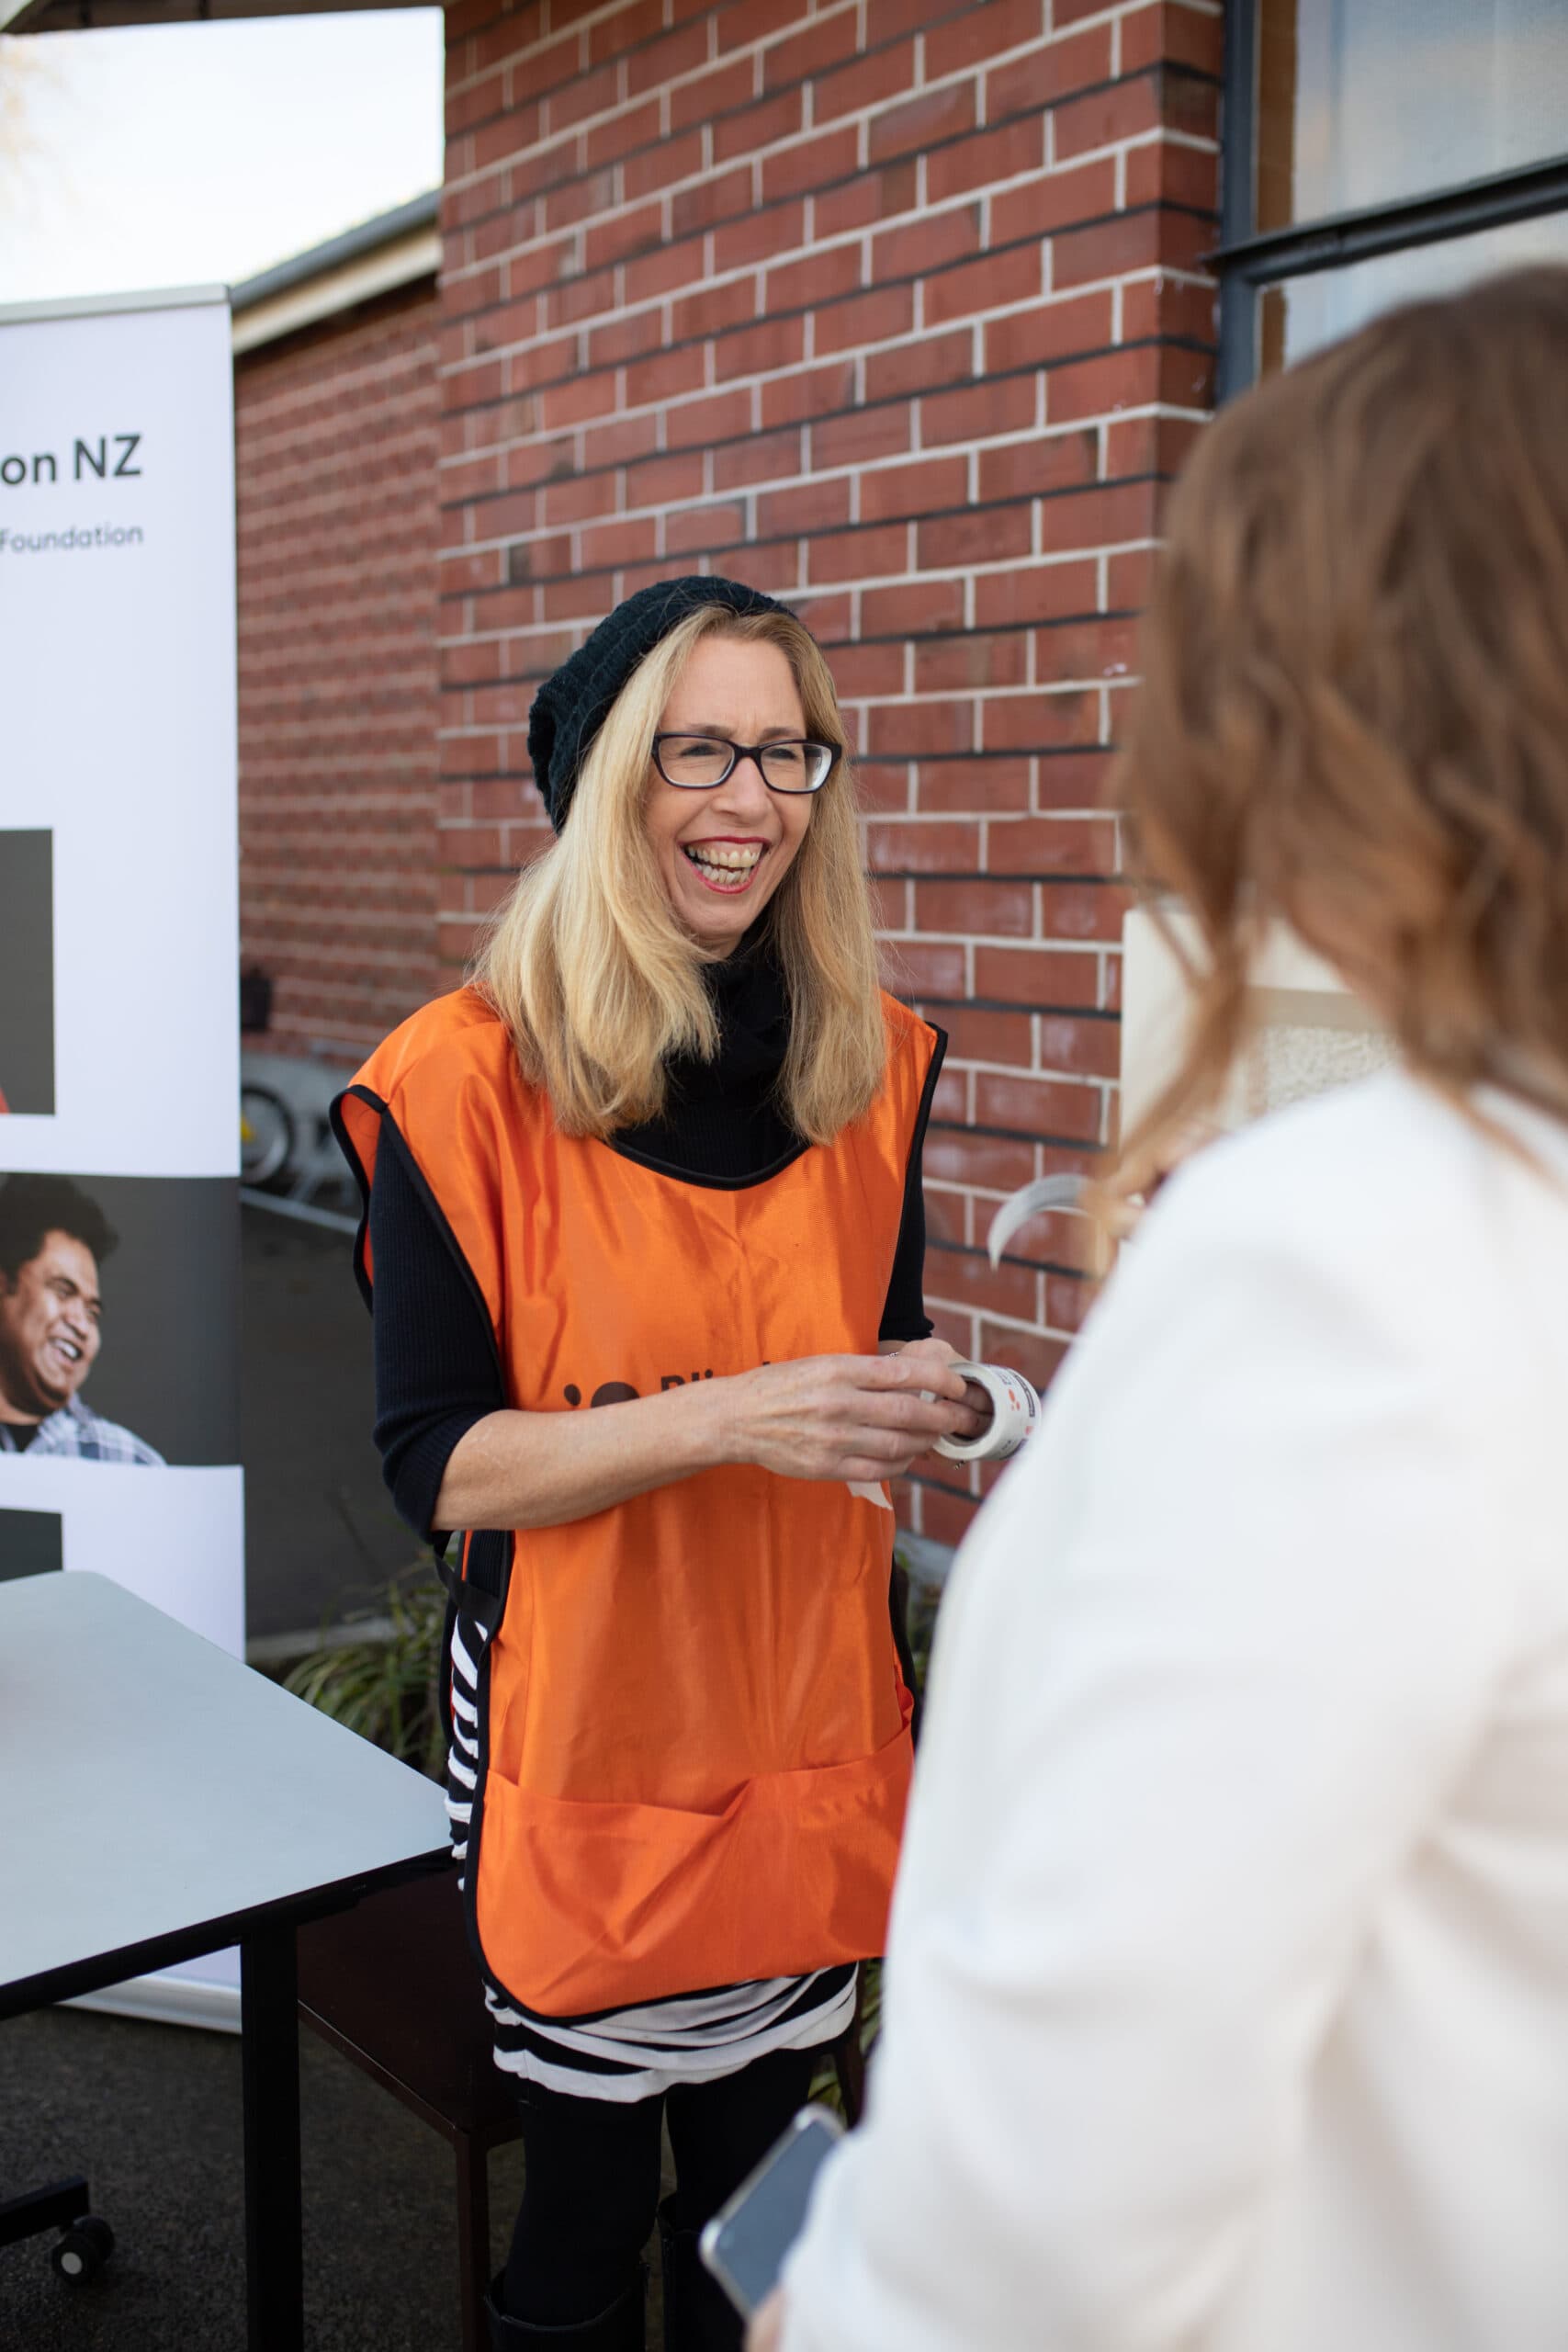 A fundraising volunteer is standing at a table in the community, smiling towards someone who has come to talk about Blind Low Vision NZ's appeal